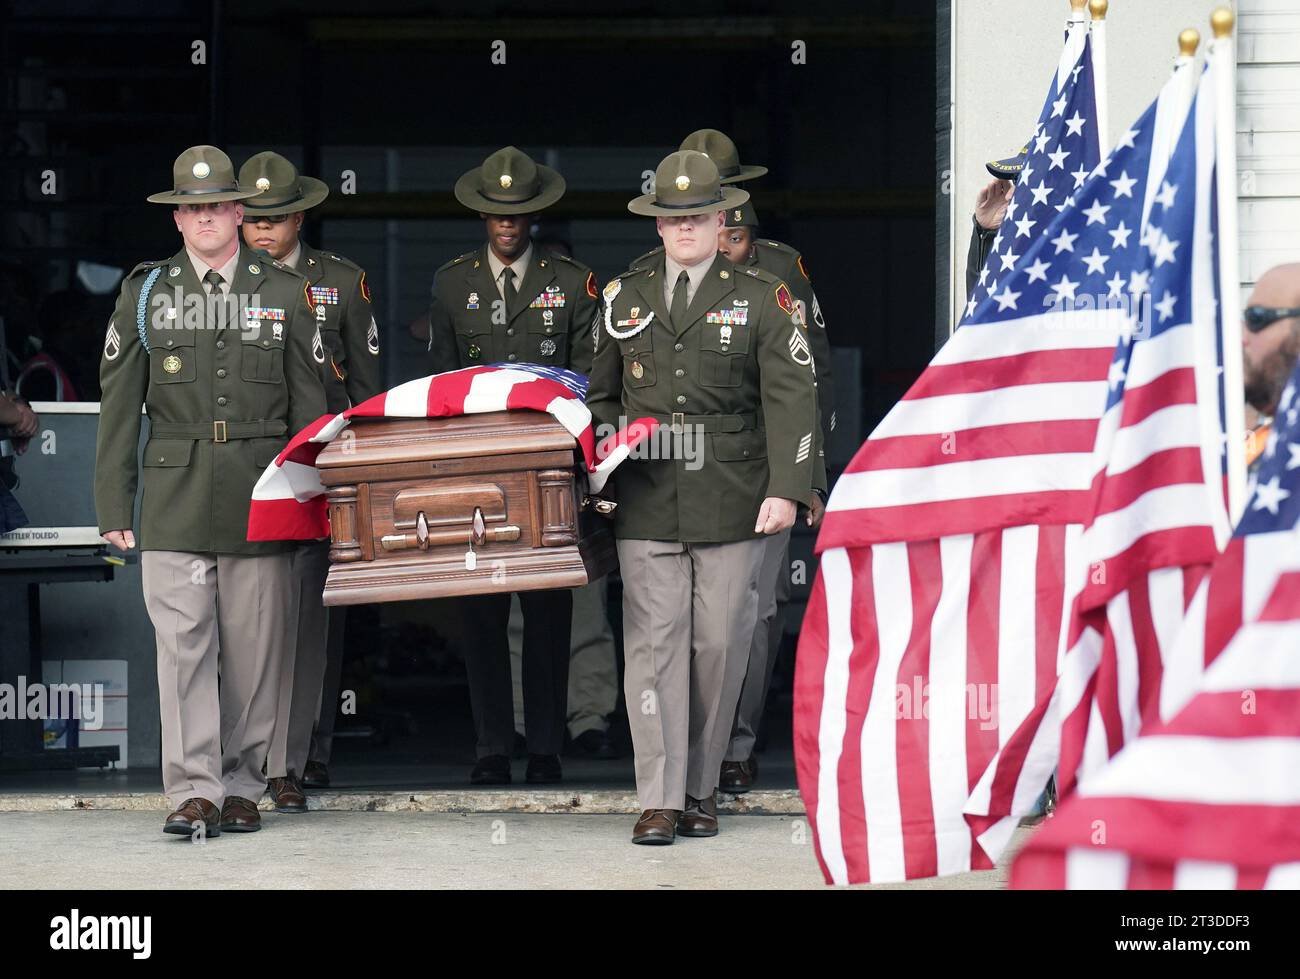 St. Louis, United States. 24th Oct, 2023. Members of an honor guard carry the casket containing the remains of World War II veteran Cpl. James Hurt as he returns home at Lambert-St. Louis International Airport on Tuesday, October 24, 2023. Corporal James Hurt of East St. Louis was one of 2,800 soldiers who died in a Japanese prisoner-of-war camp in the Philippines during World War II in 1942 Photo by Bill Greenblatt/UPI Credit: UPI/Alamy Live News Stock Photo